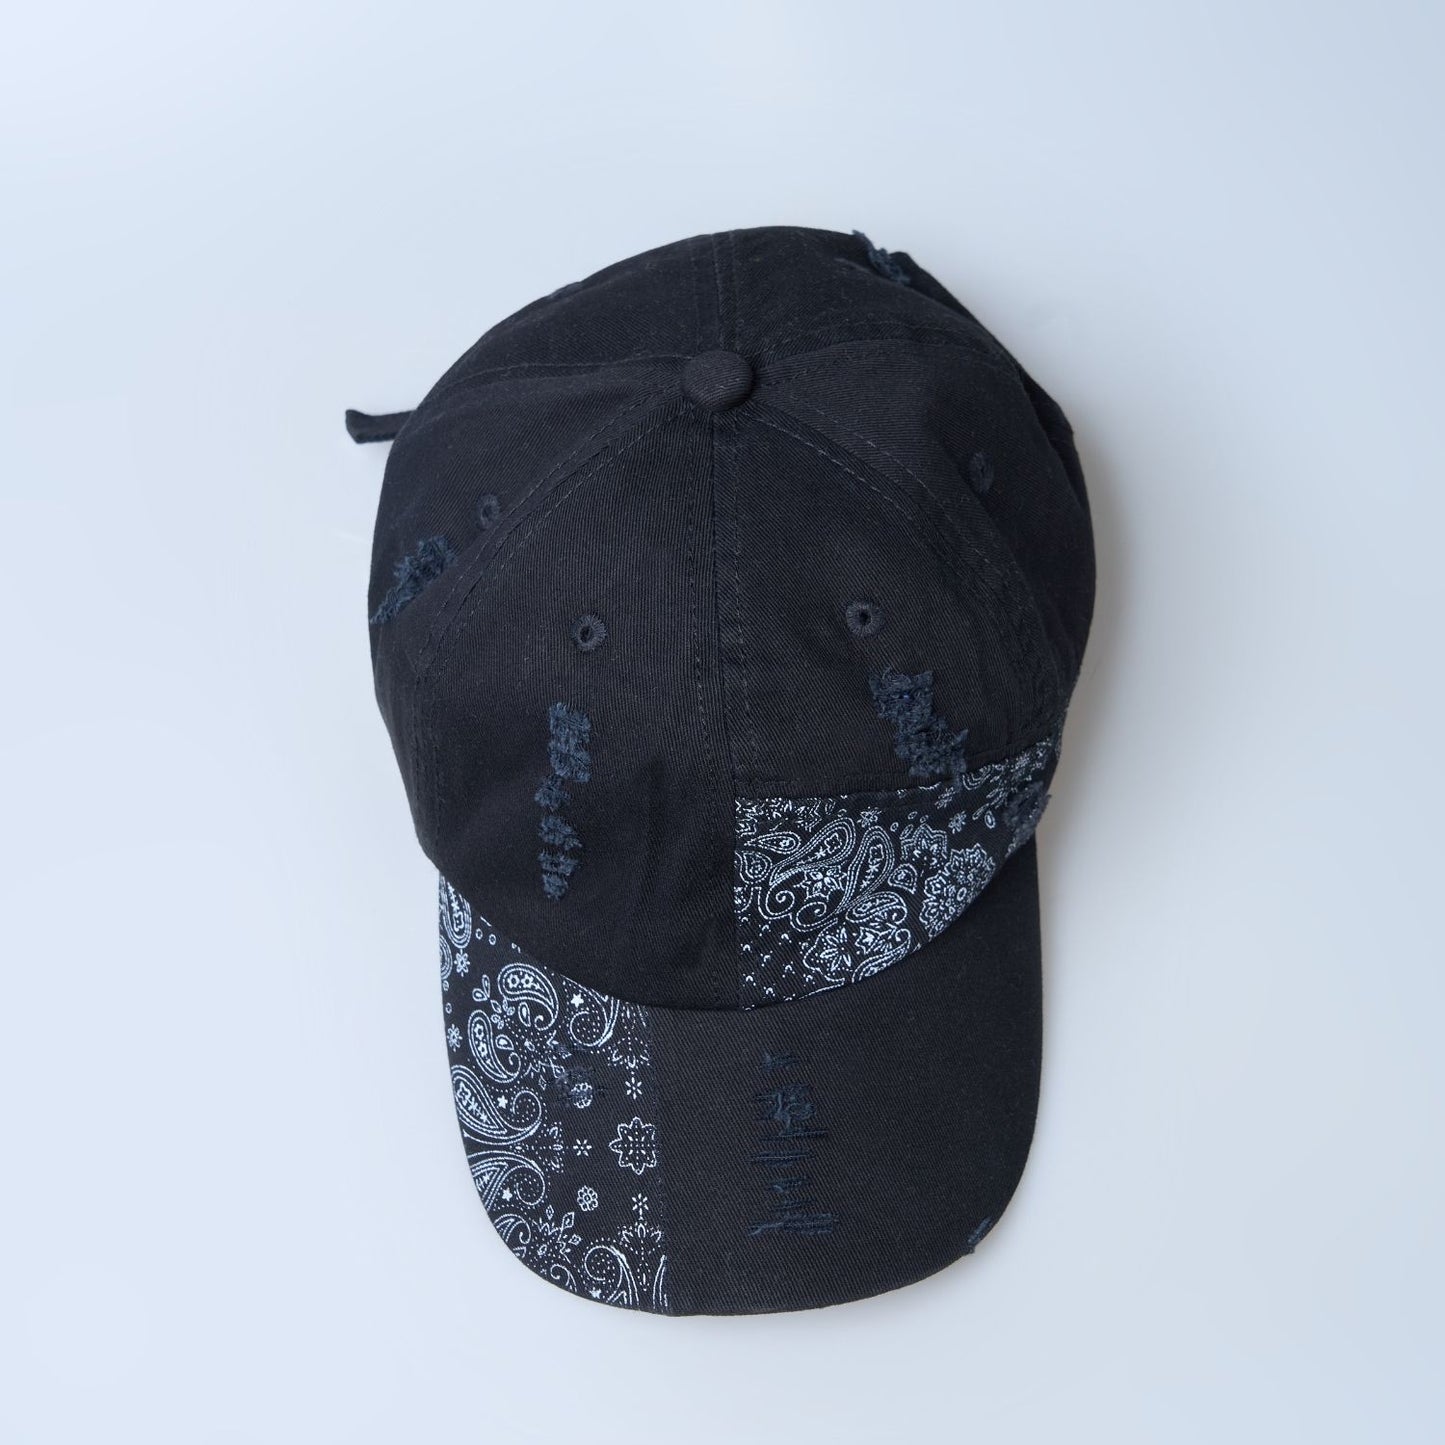 Up view of Black colored, design patterned cap for men.